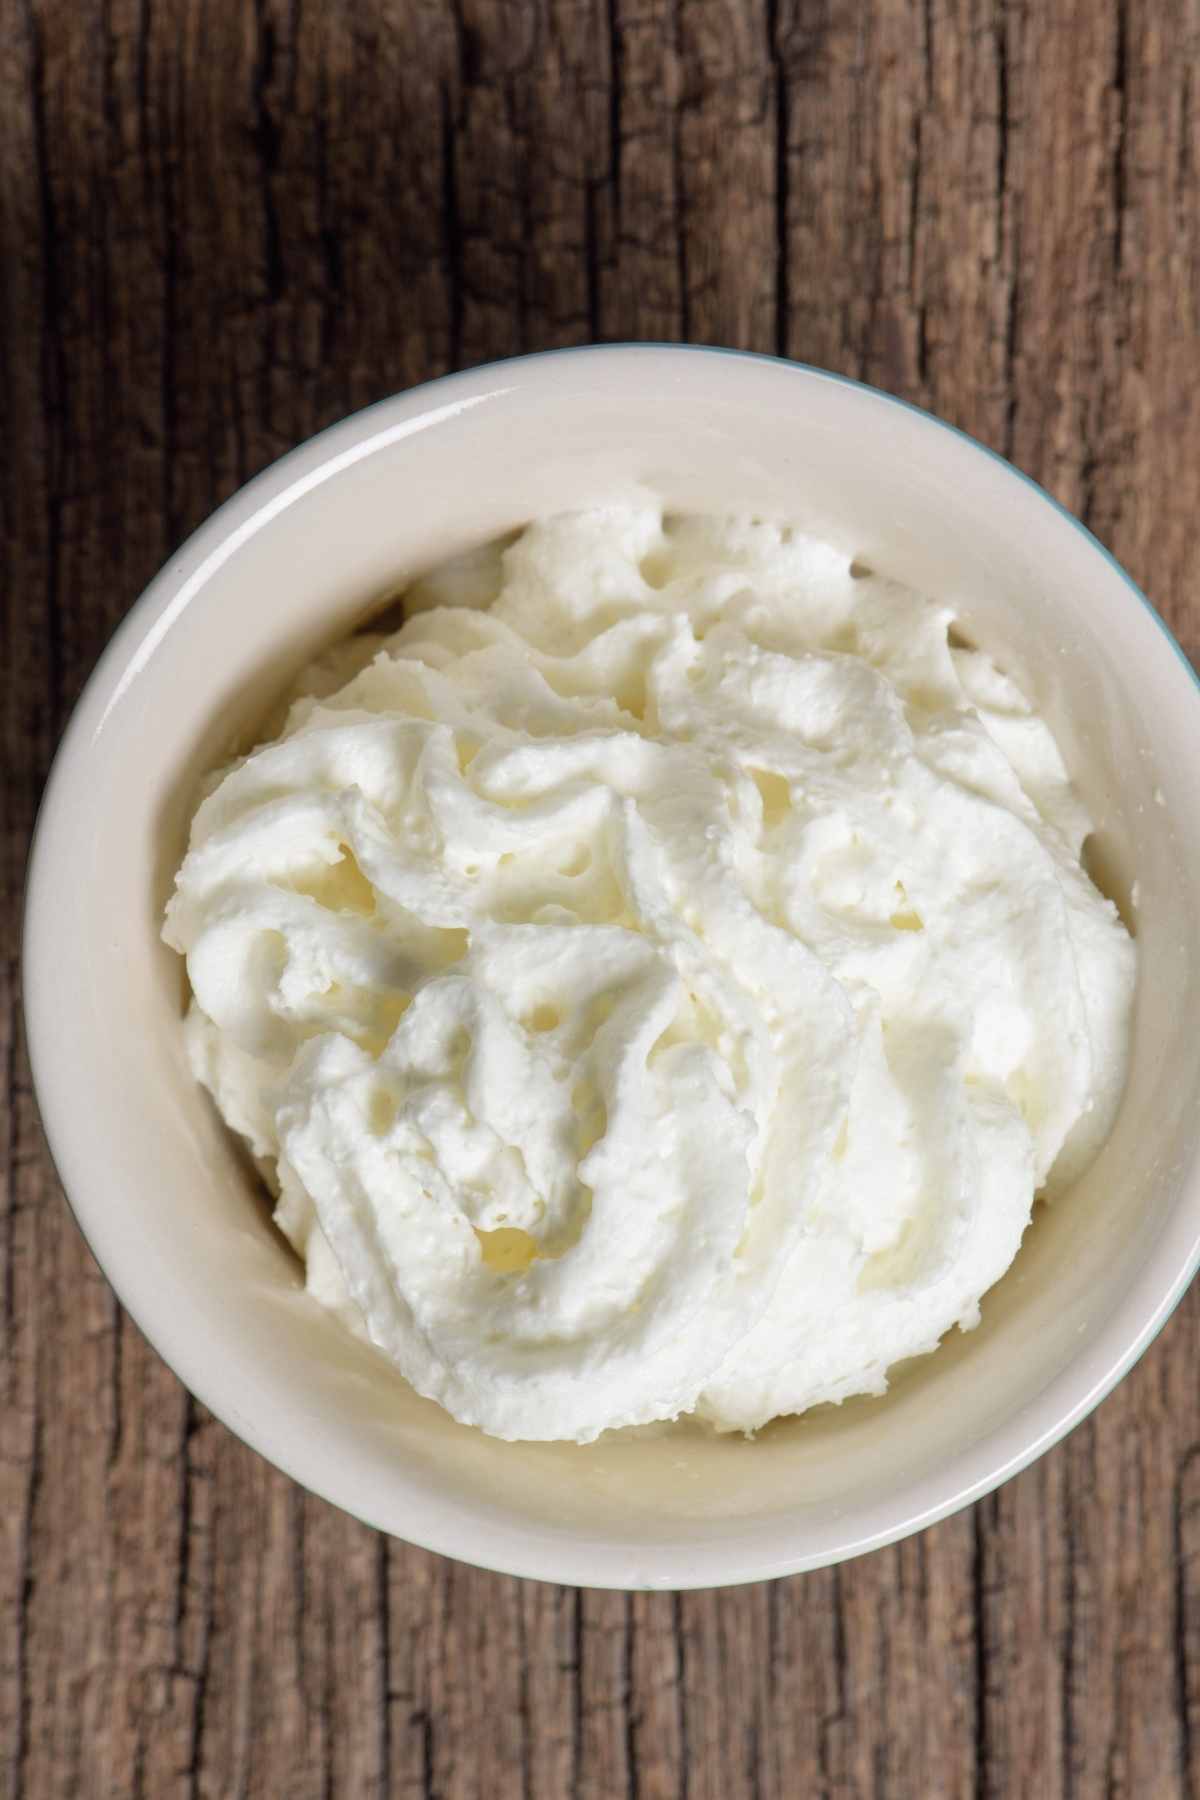 Do you want to make a light and fluffy Cool Whip Frosting from scratch? This super easy recipe has a yummy vanilla flavor and is the perfect way to finish a cake or cupcakes.